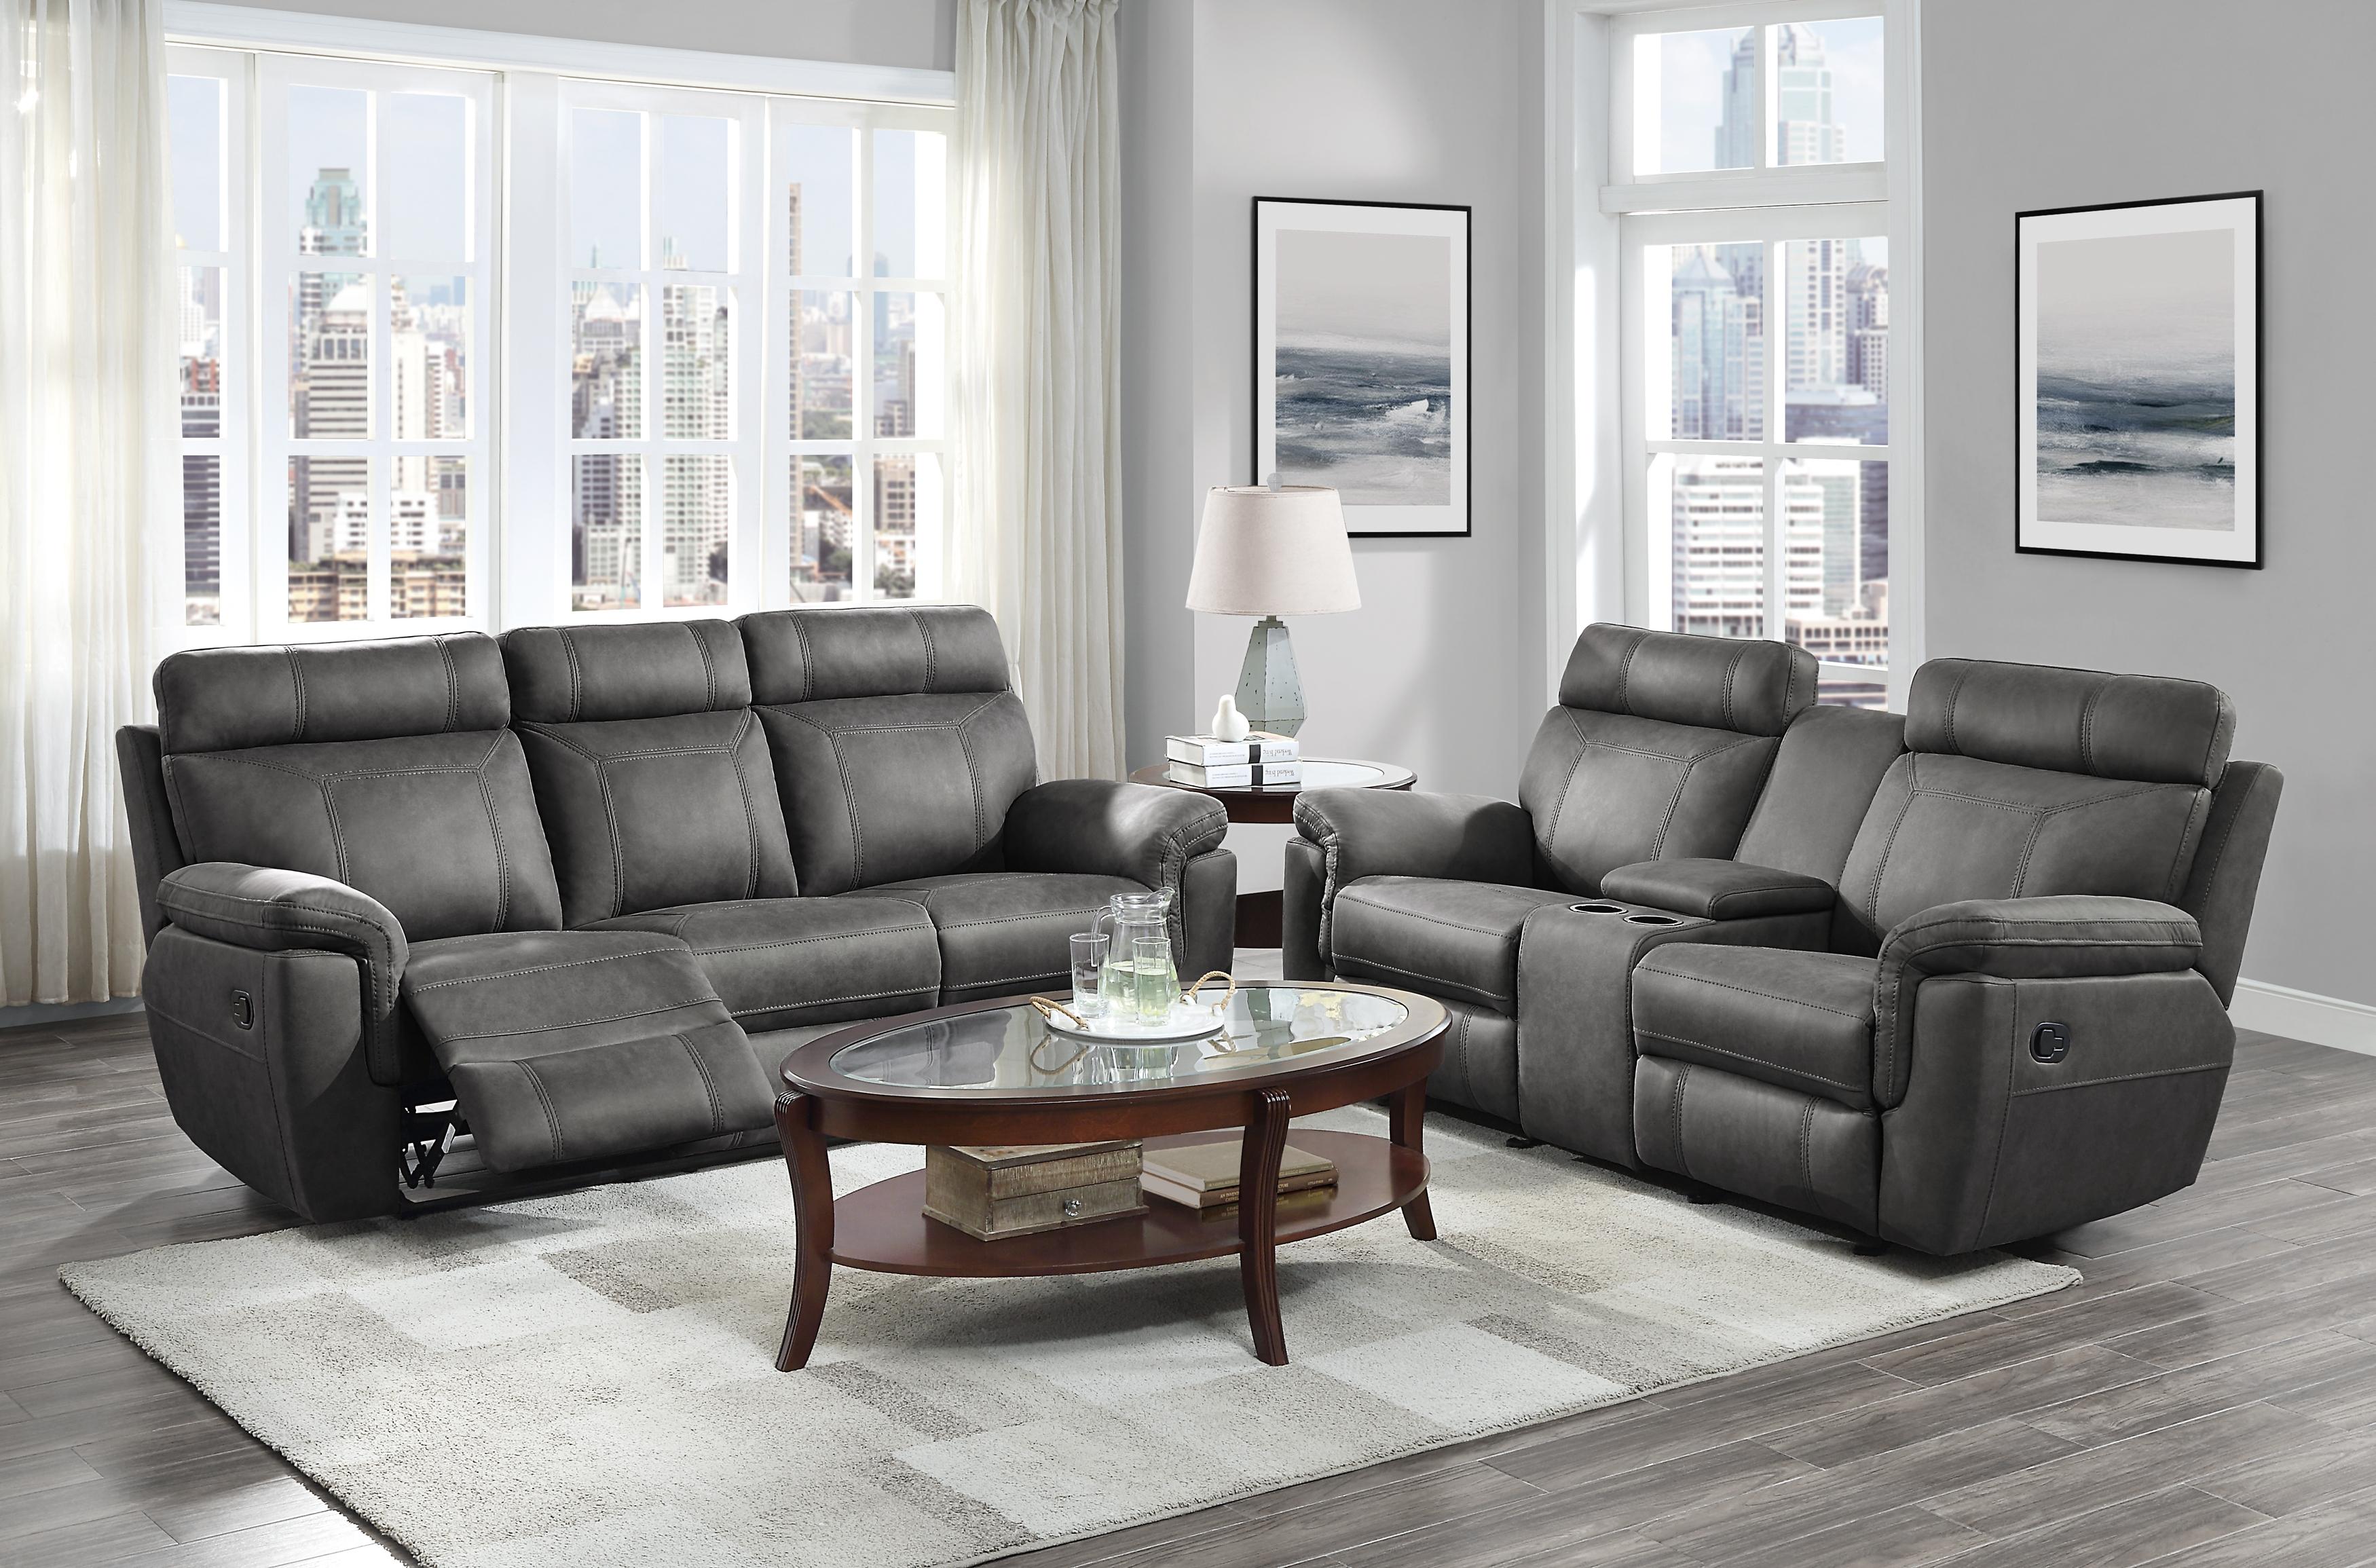 Modern Reclining Set 9301GRY-2PC Clifton 9301GRY-2PC in Gray Microfiber